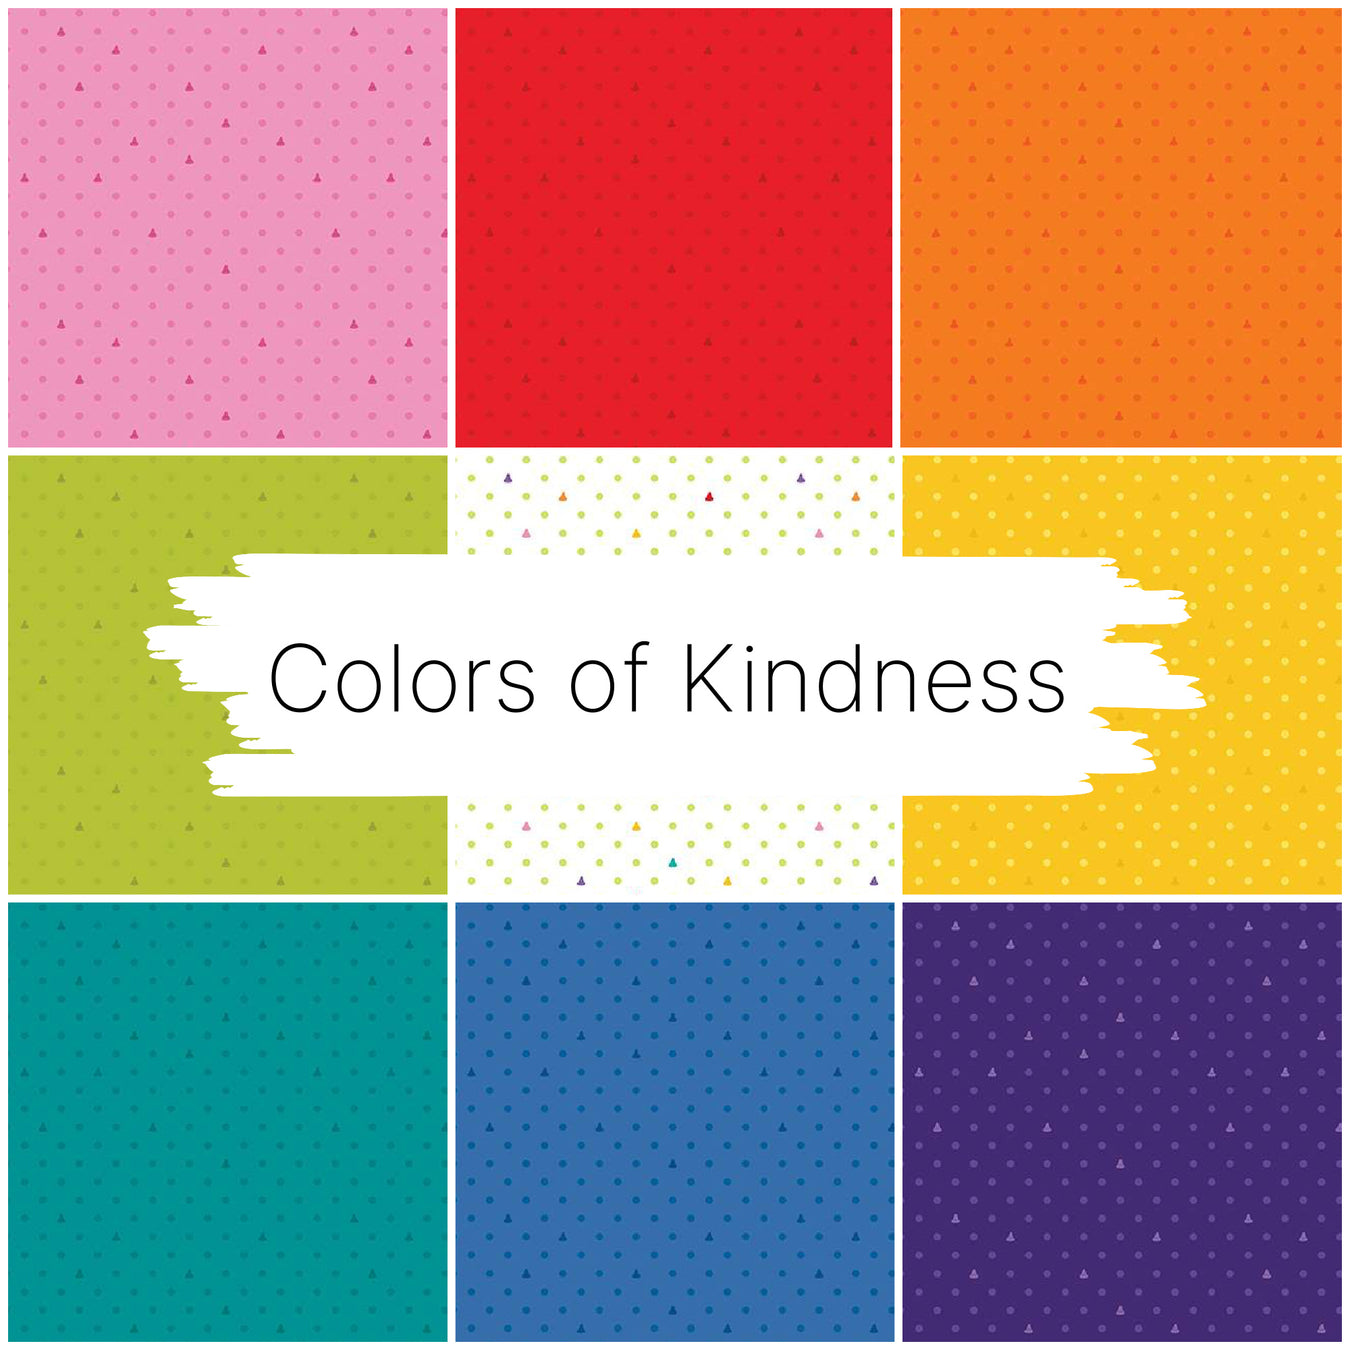 Colors of Kindness